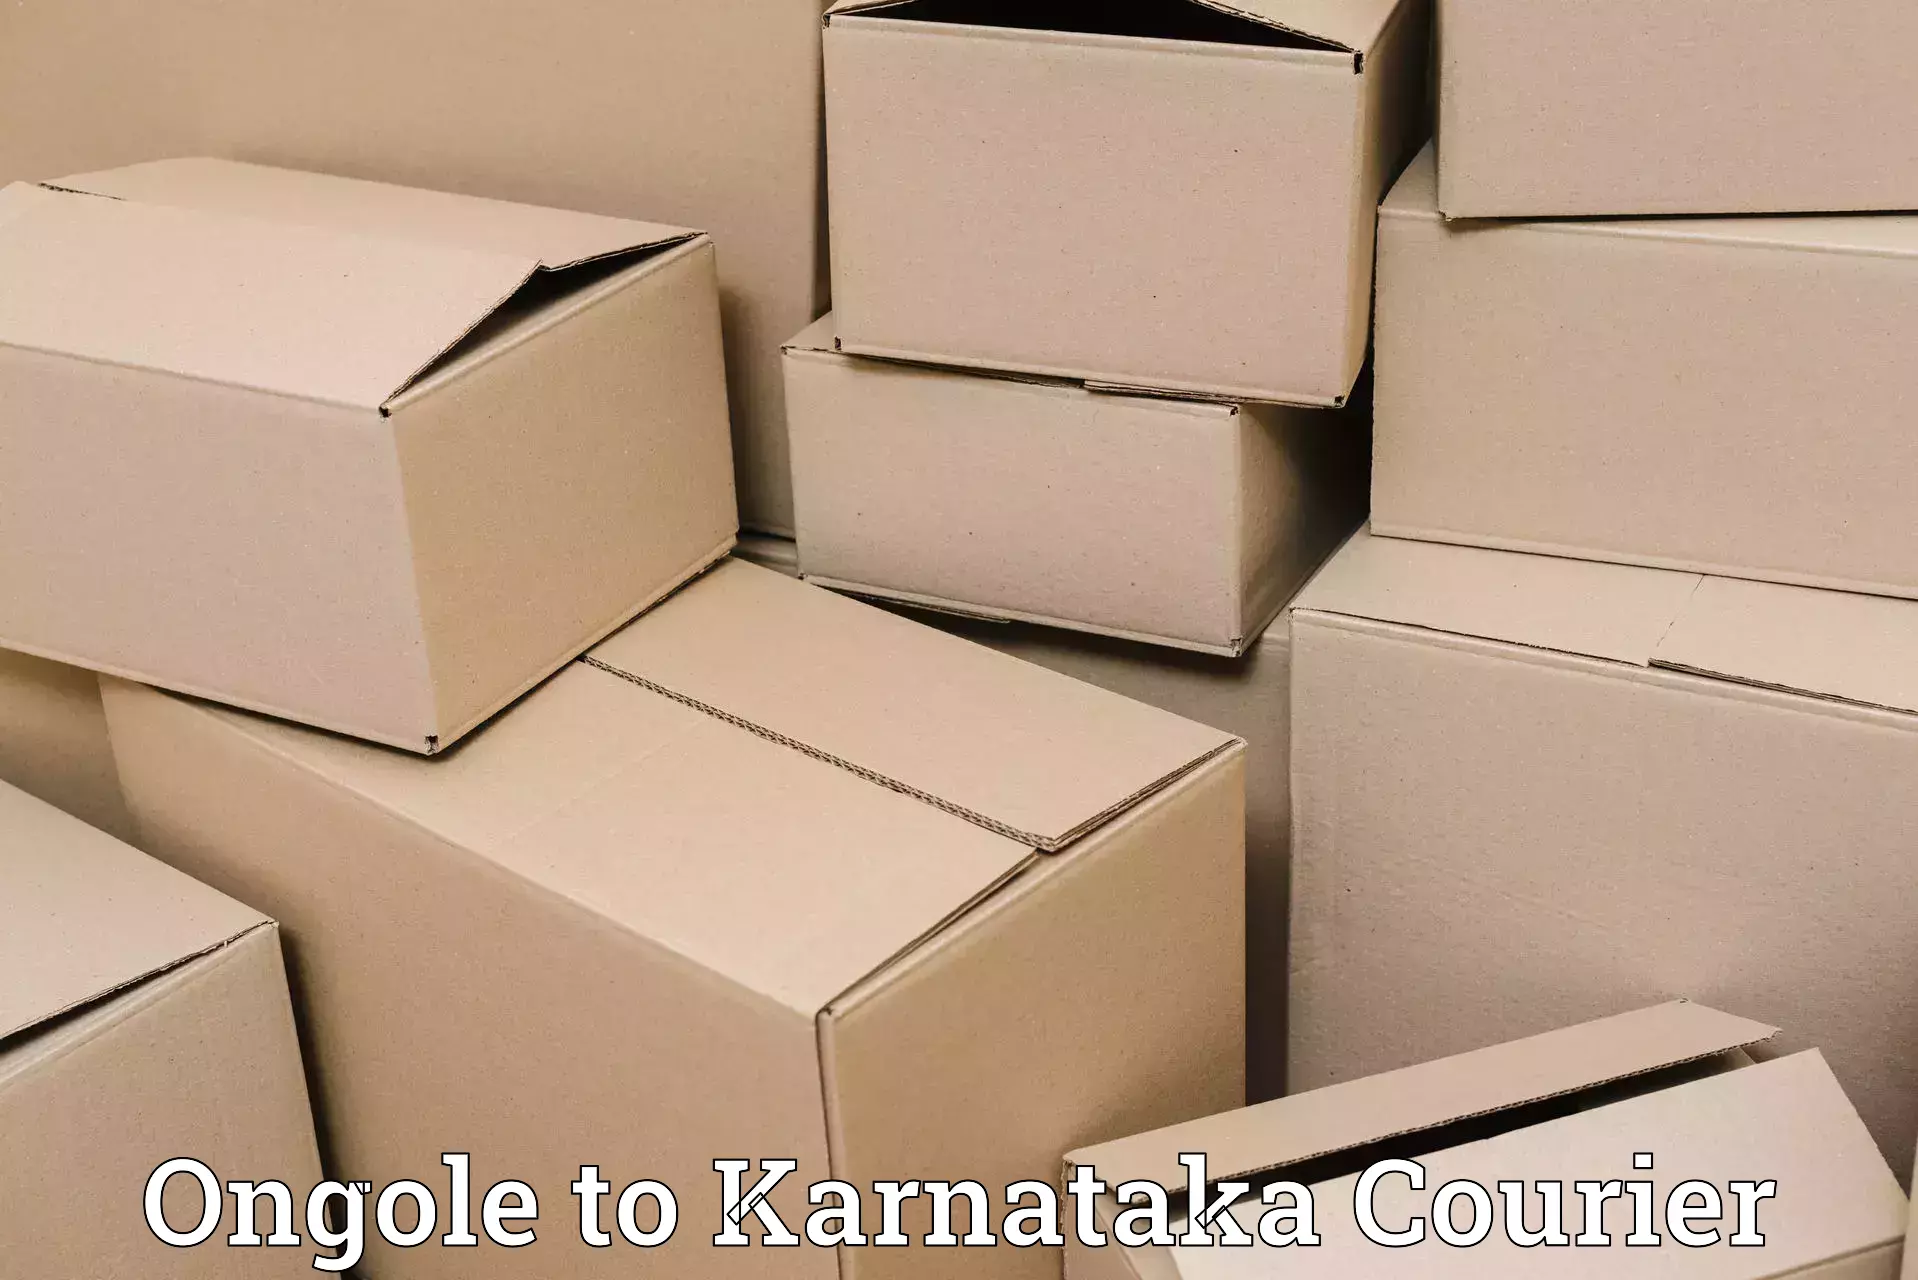 Cargo delivery service Ongole to Turuvekere